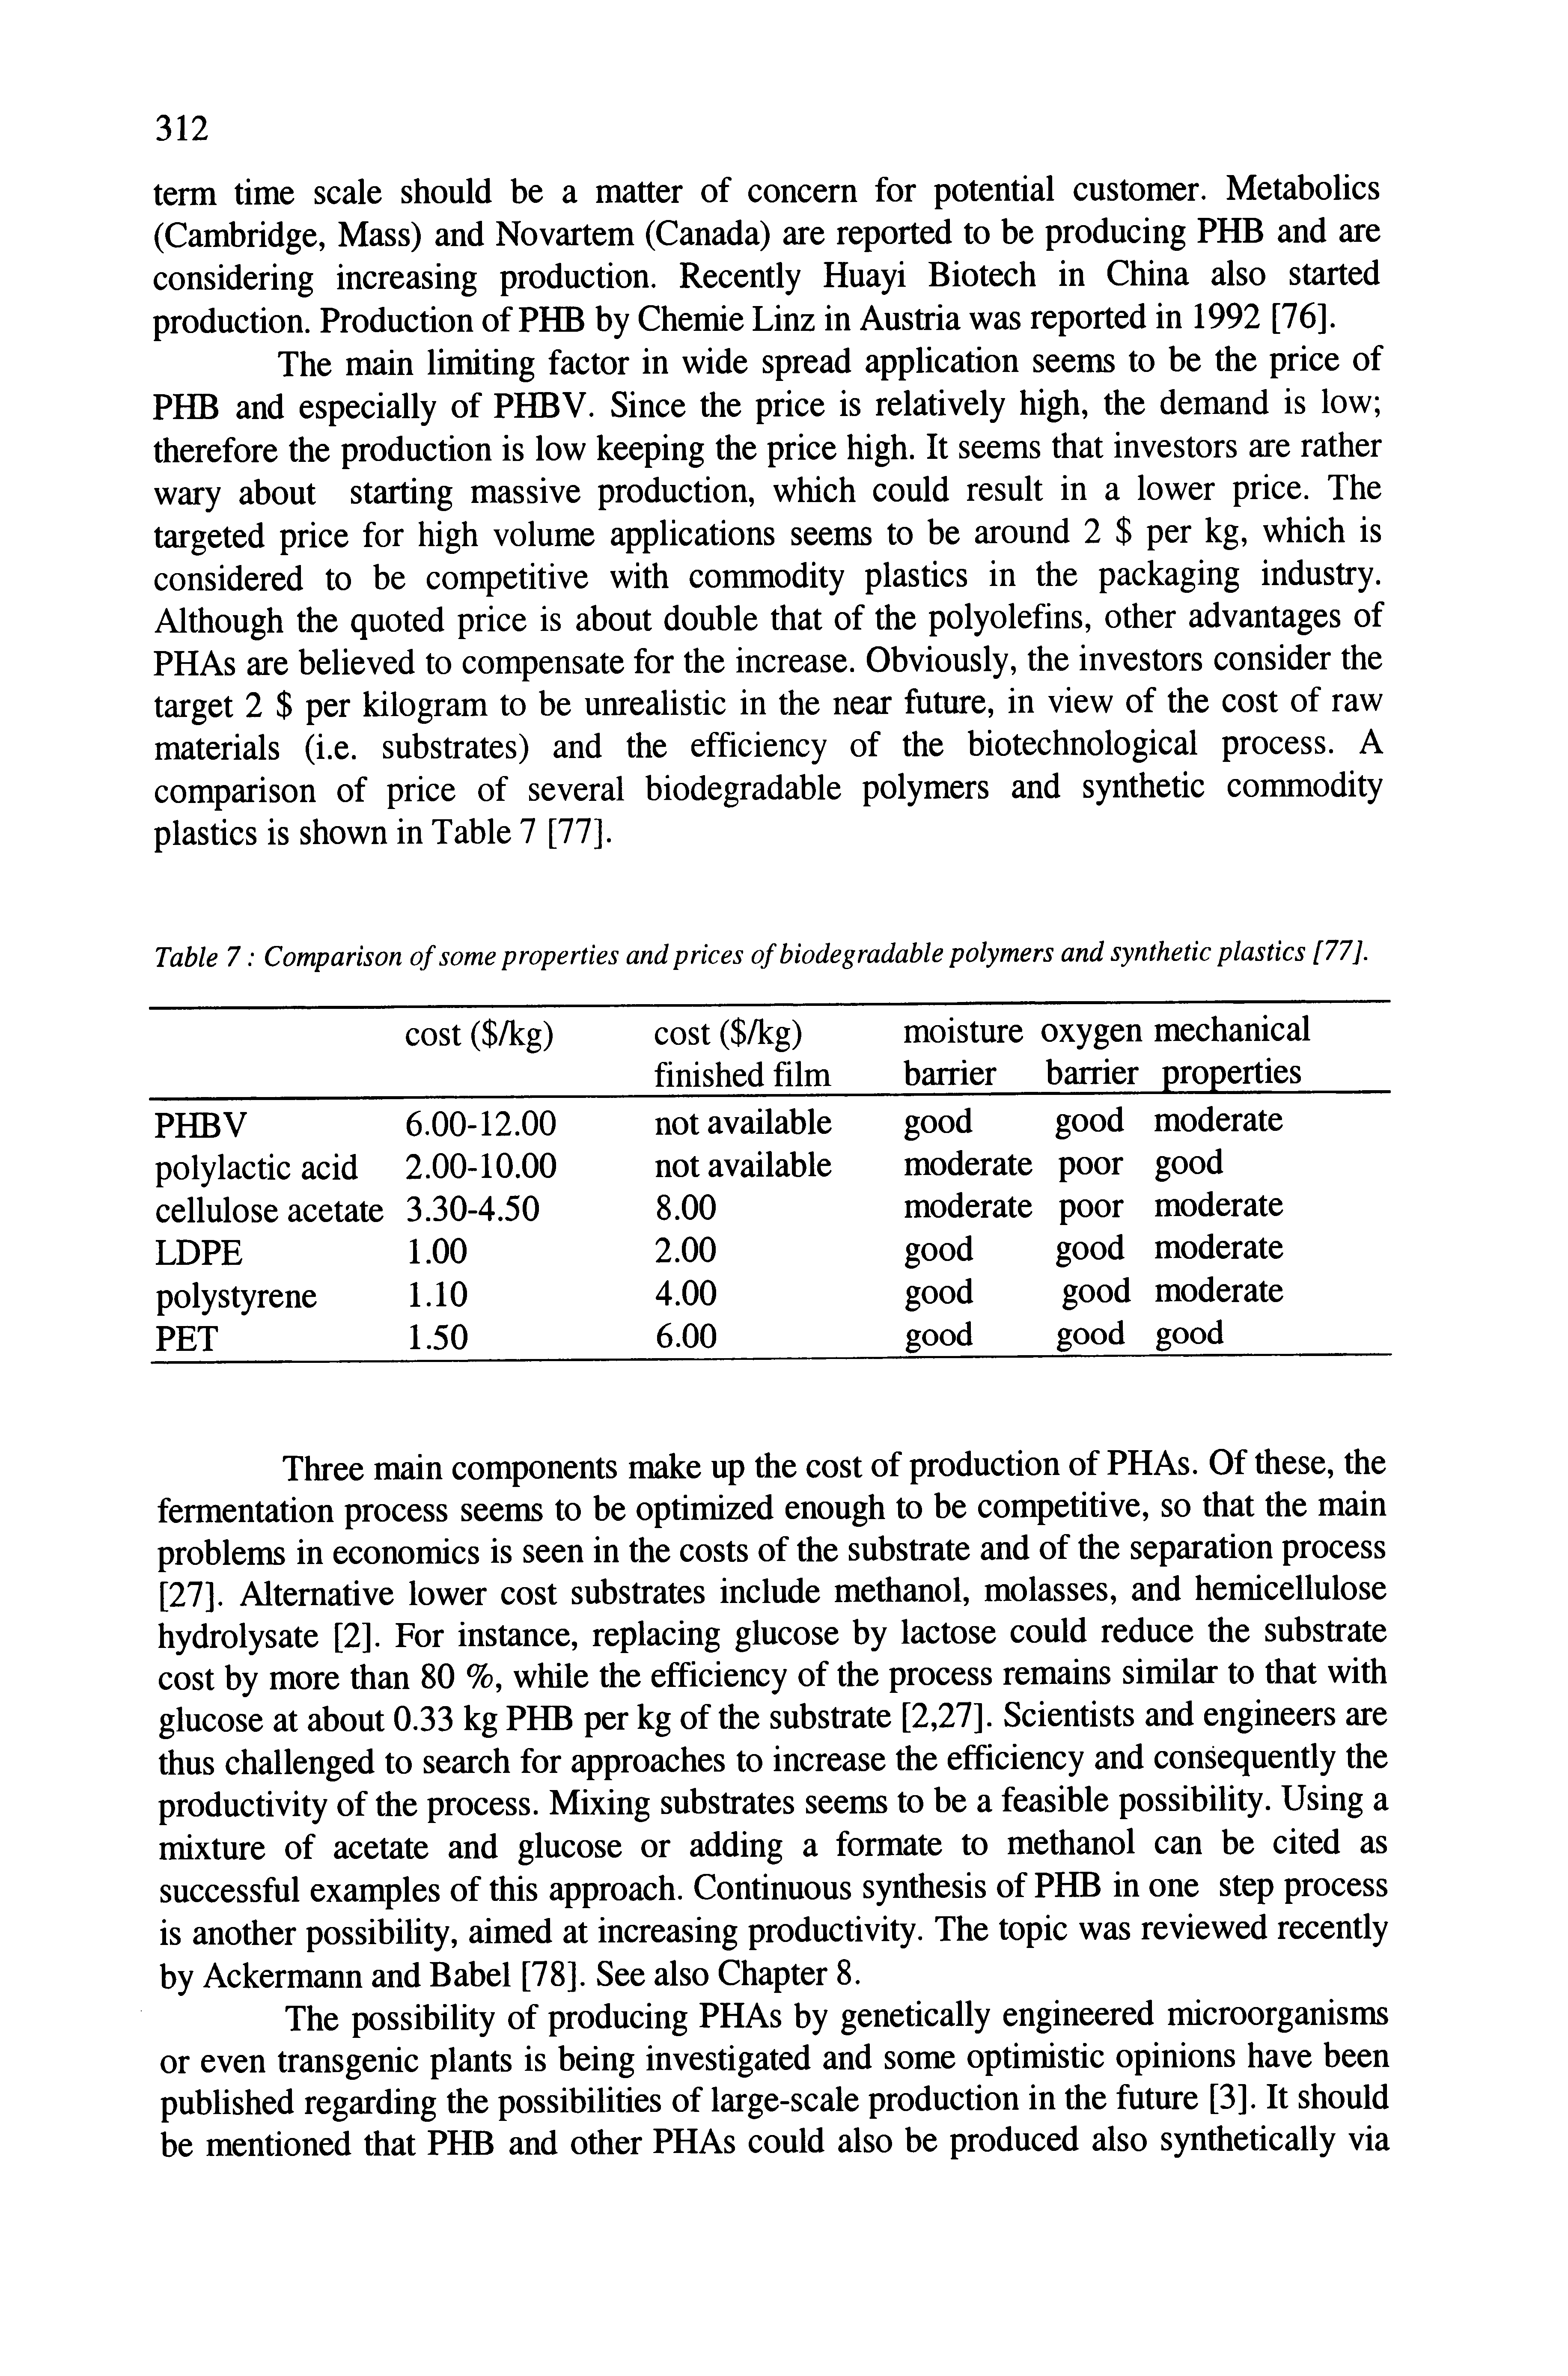 Table 7 Comparison of some properties and prices of biodegradable polymers and synthetic plastics [77].